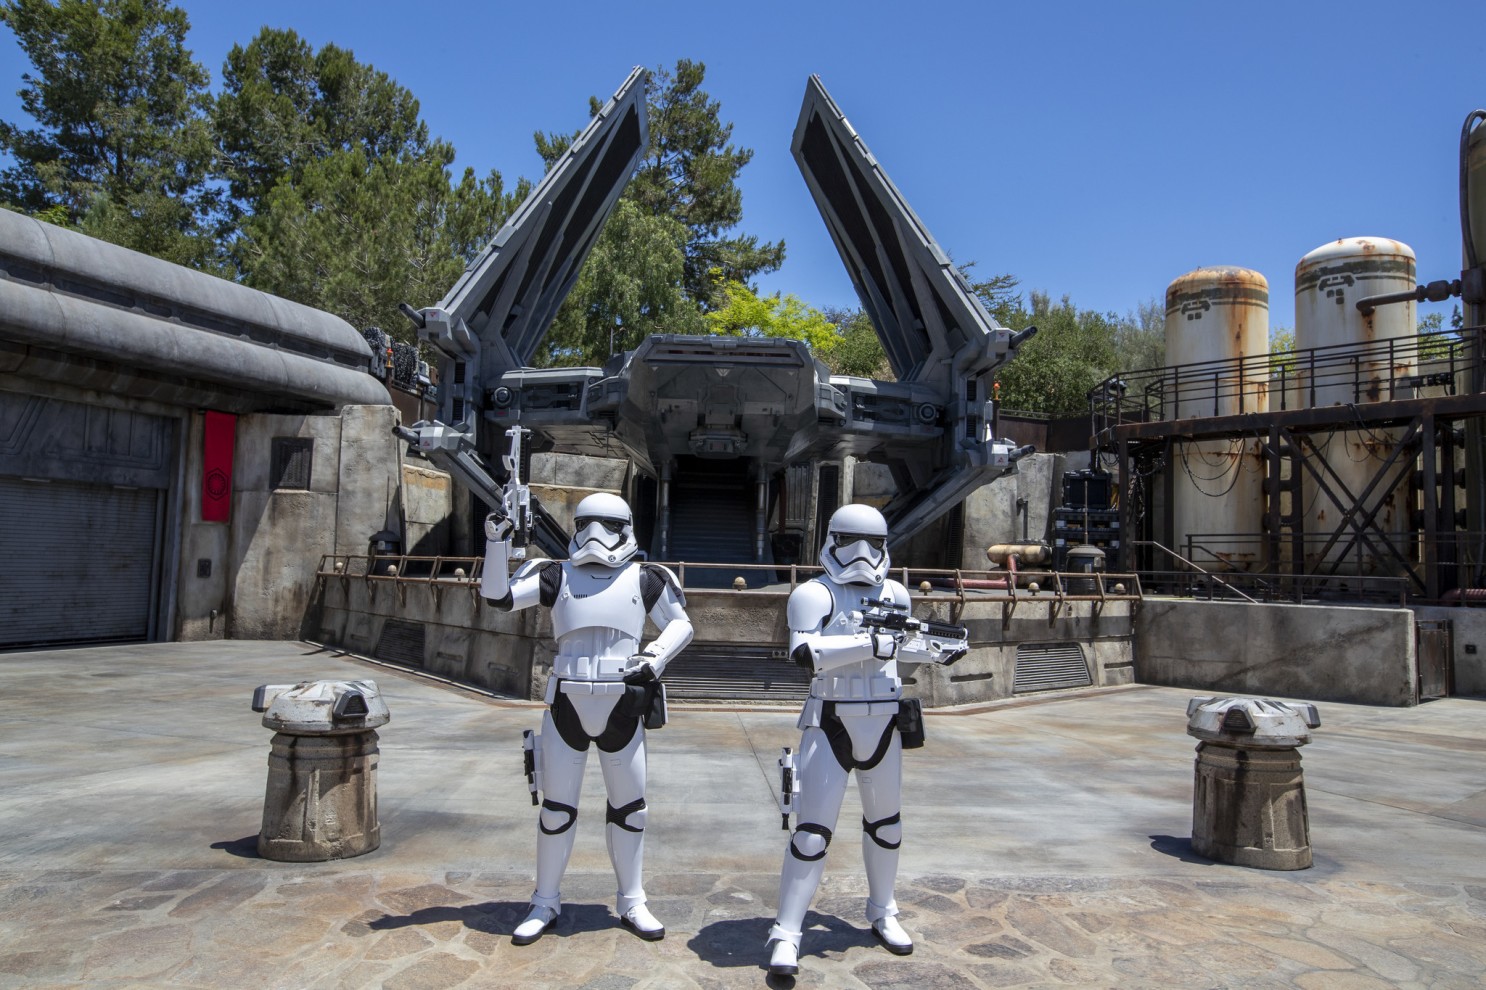 Pick Between These 🎃 Halloween Costumes and We’ll Guess Your Age Star Wars Galaxy’s Edge